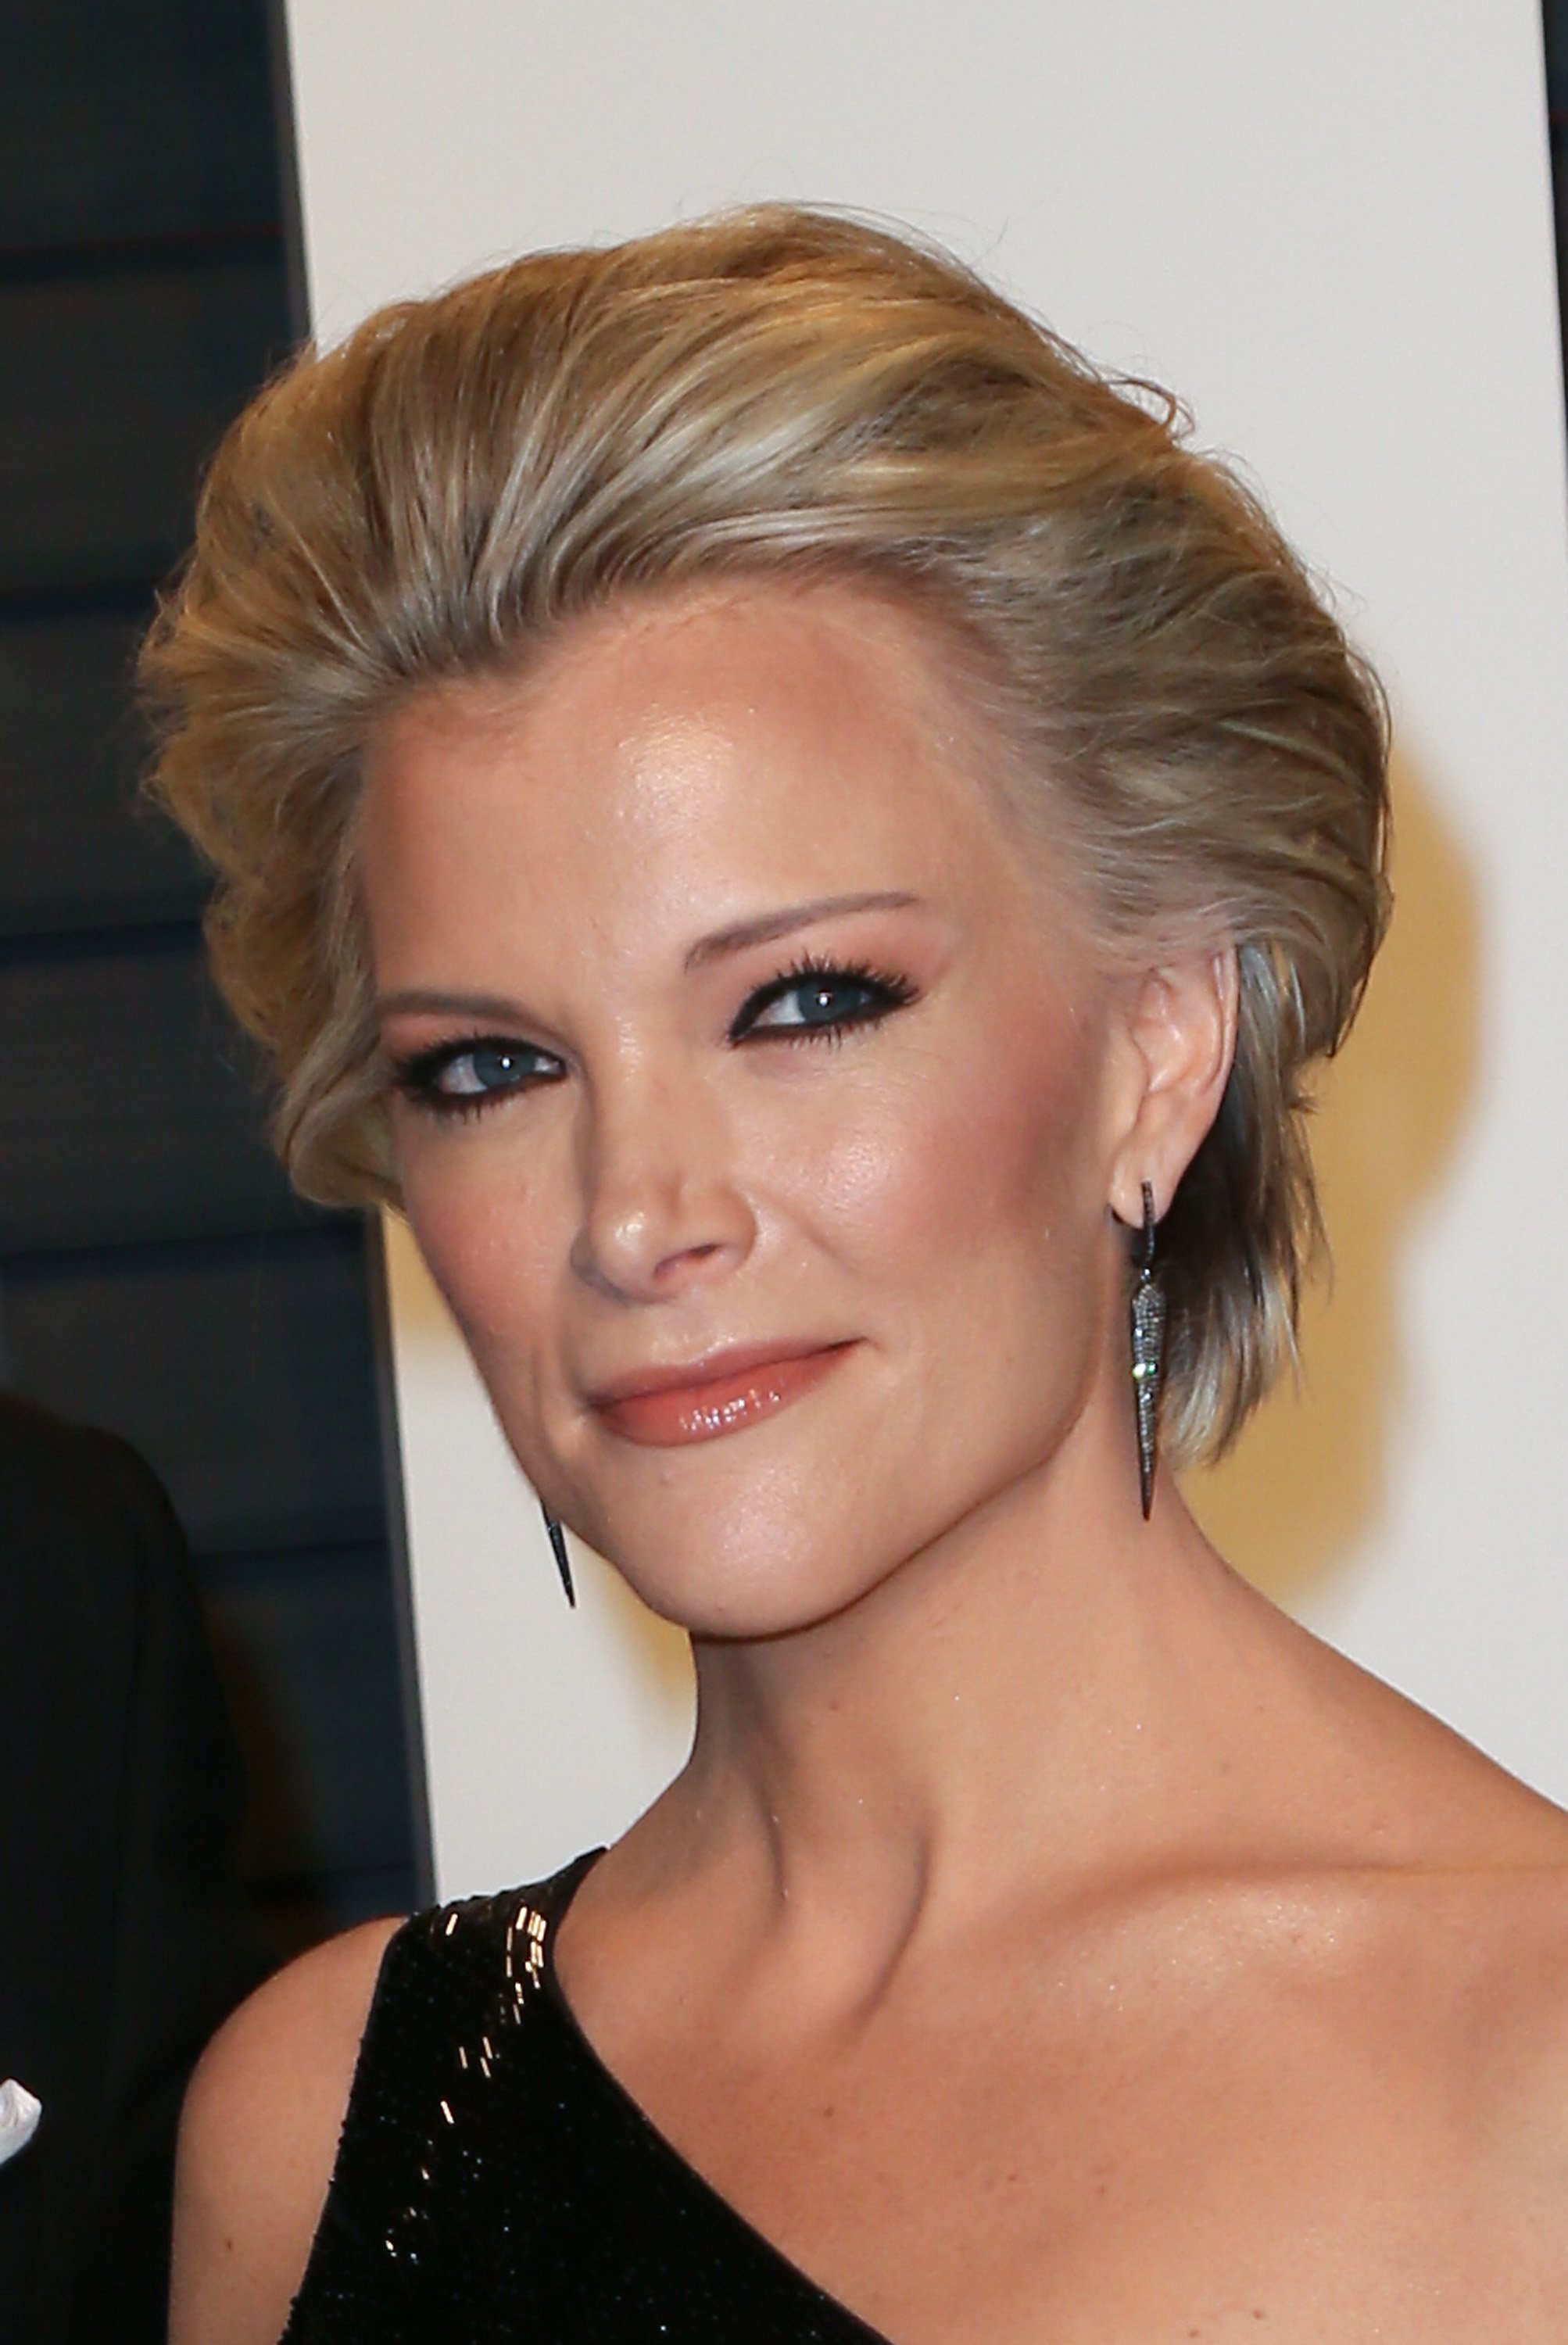 Megyn Kelly arrives at the 2016 Vanity Fair Oscar Party Hosted by Graydon Carter at the Wallis Annenberg Center for the Performing Arts on February 28, 2016, in Beverly Hills, California. | Source: Getty Images.